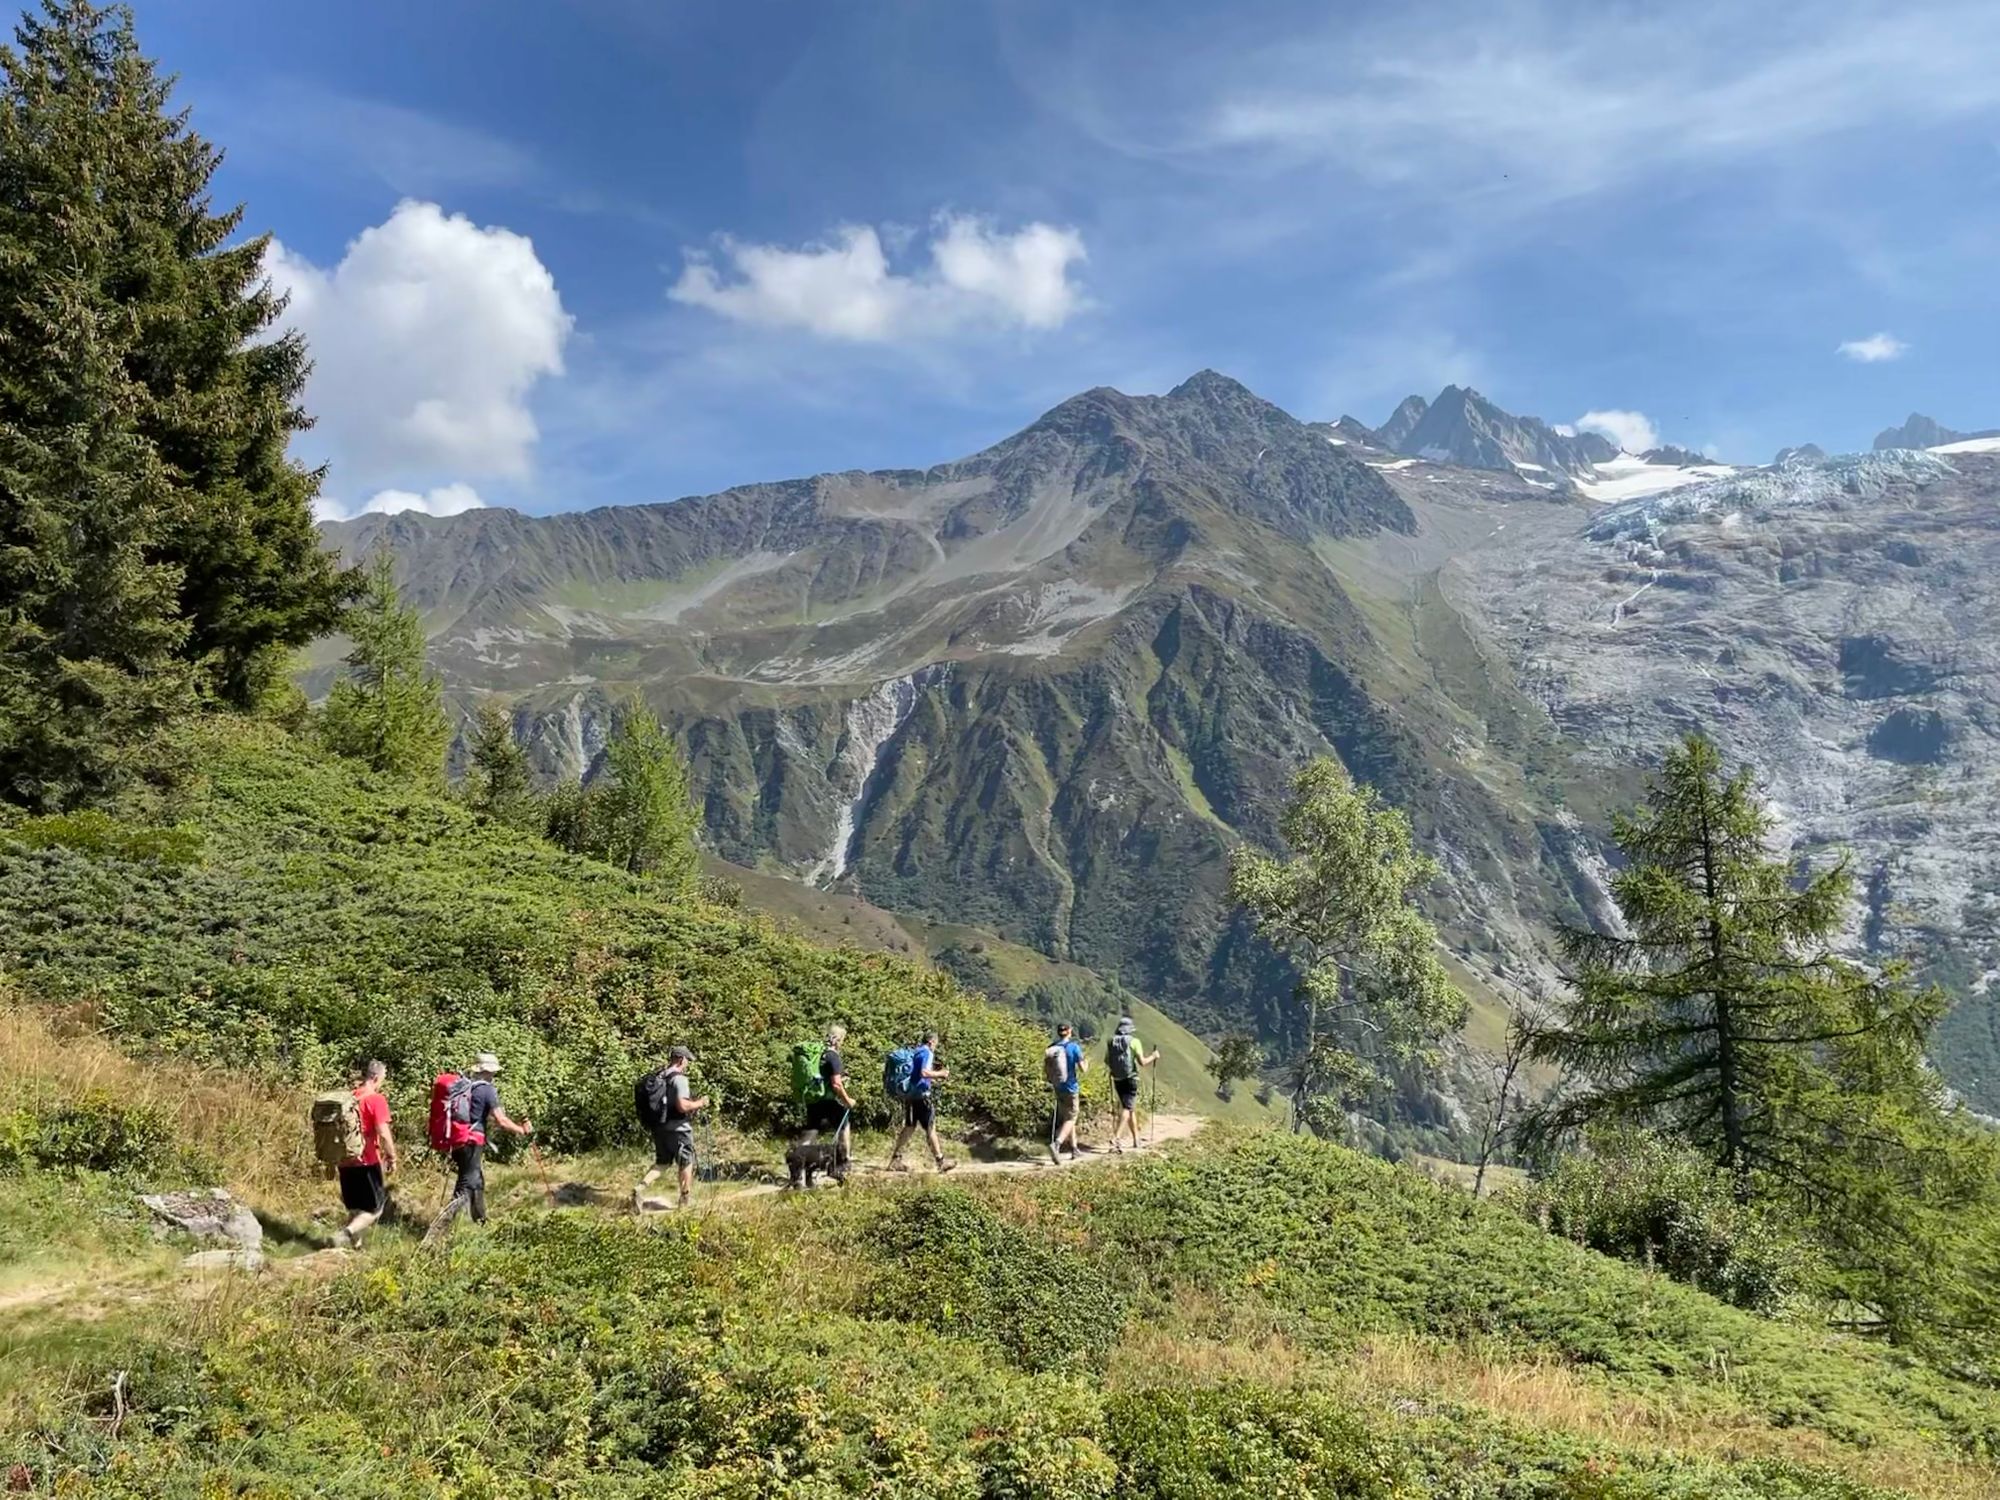 Hikers on the Mont Blanc trail, one of the most iconic trails in the world